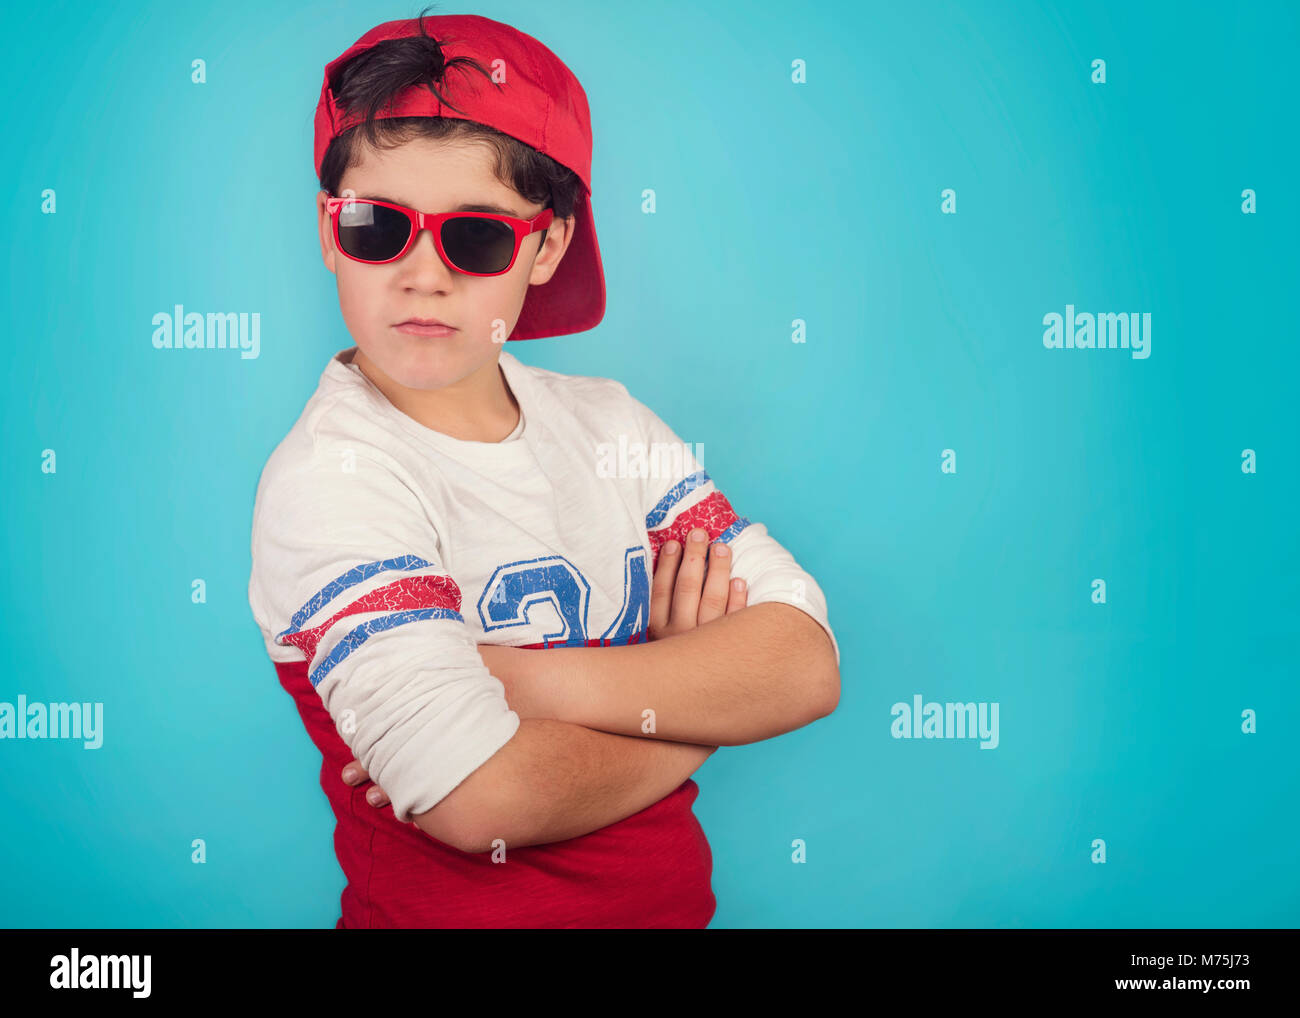 serious boy with sunglasses on blue background Stock Photo